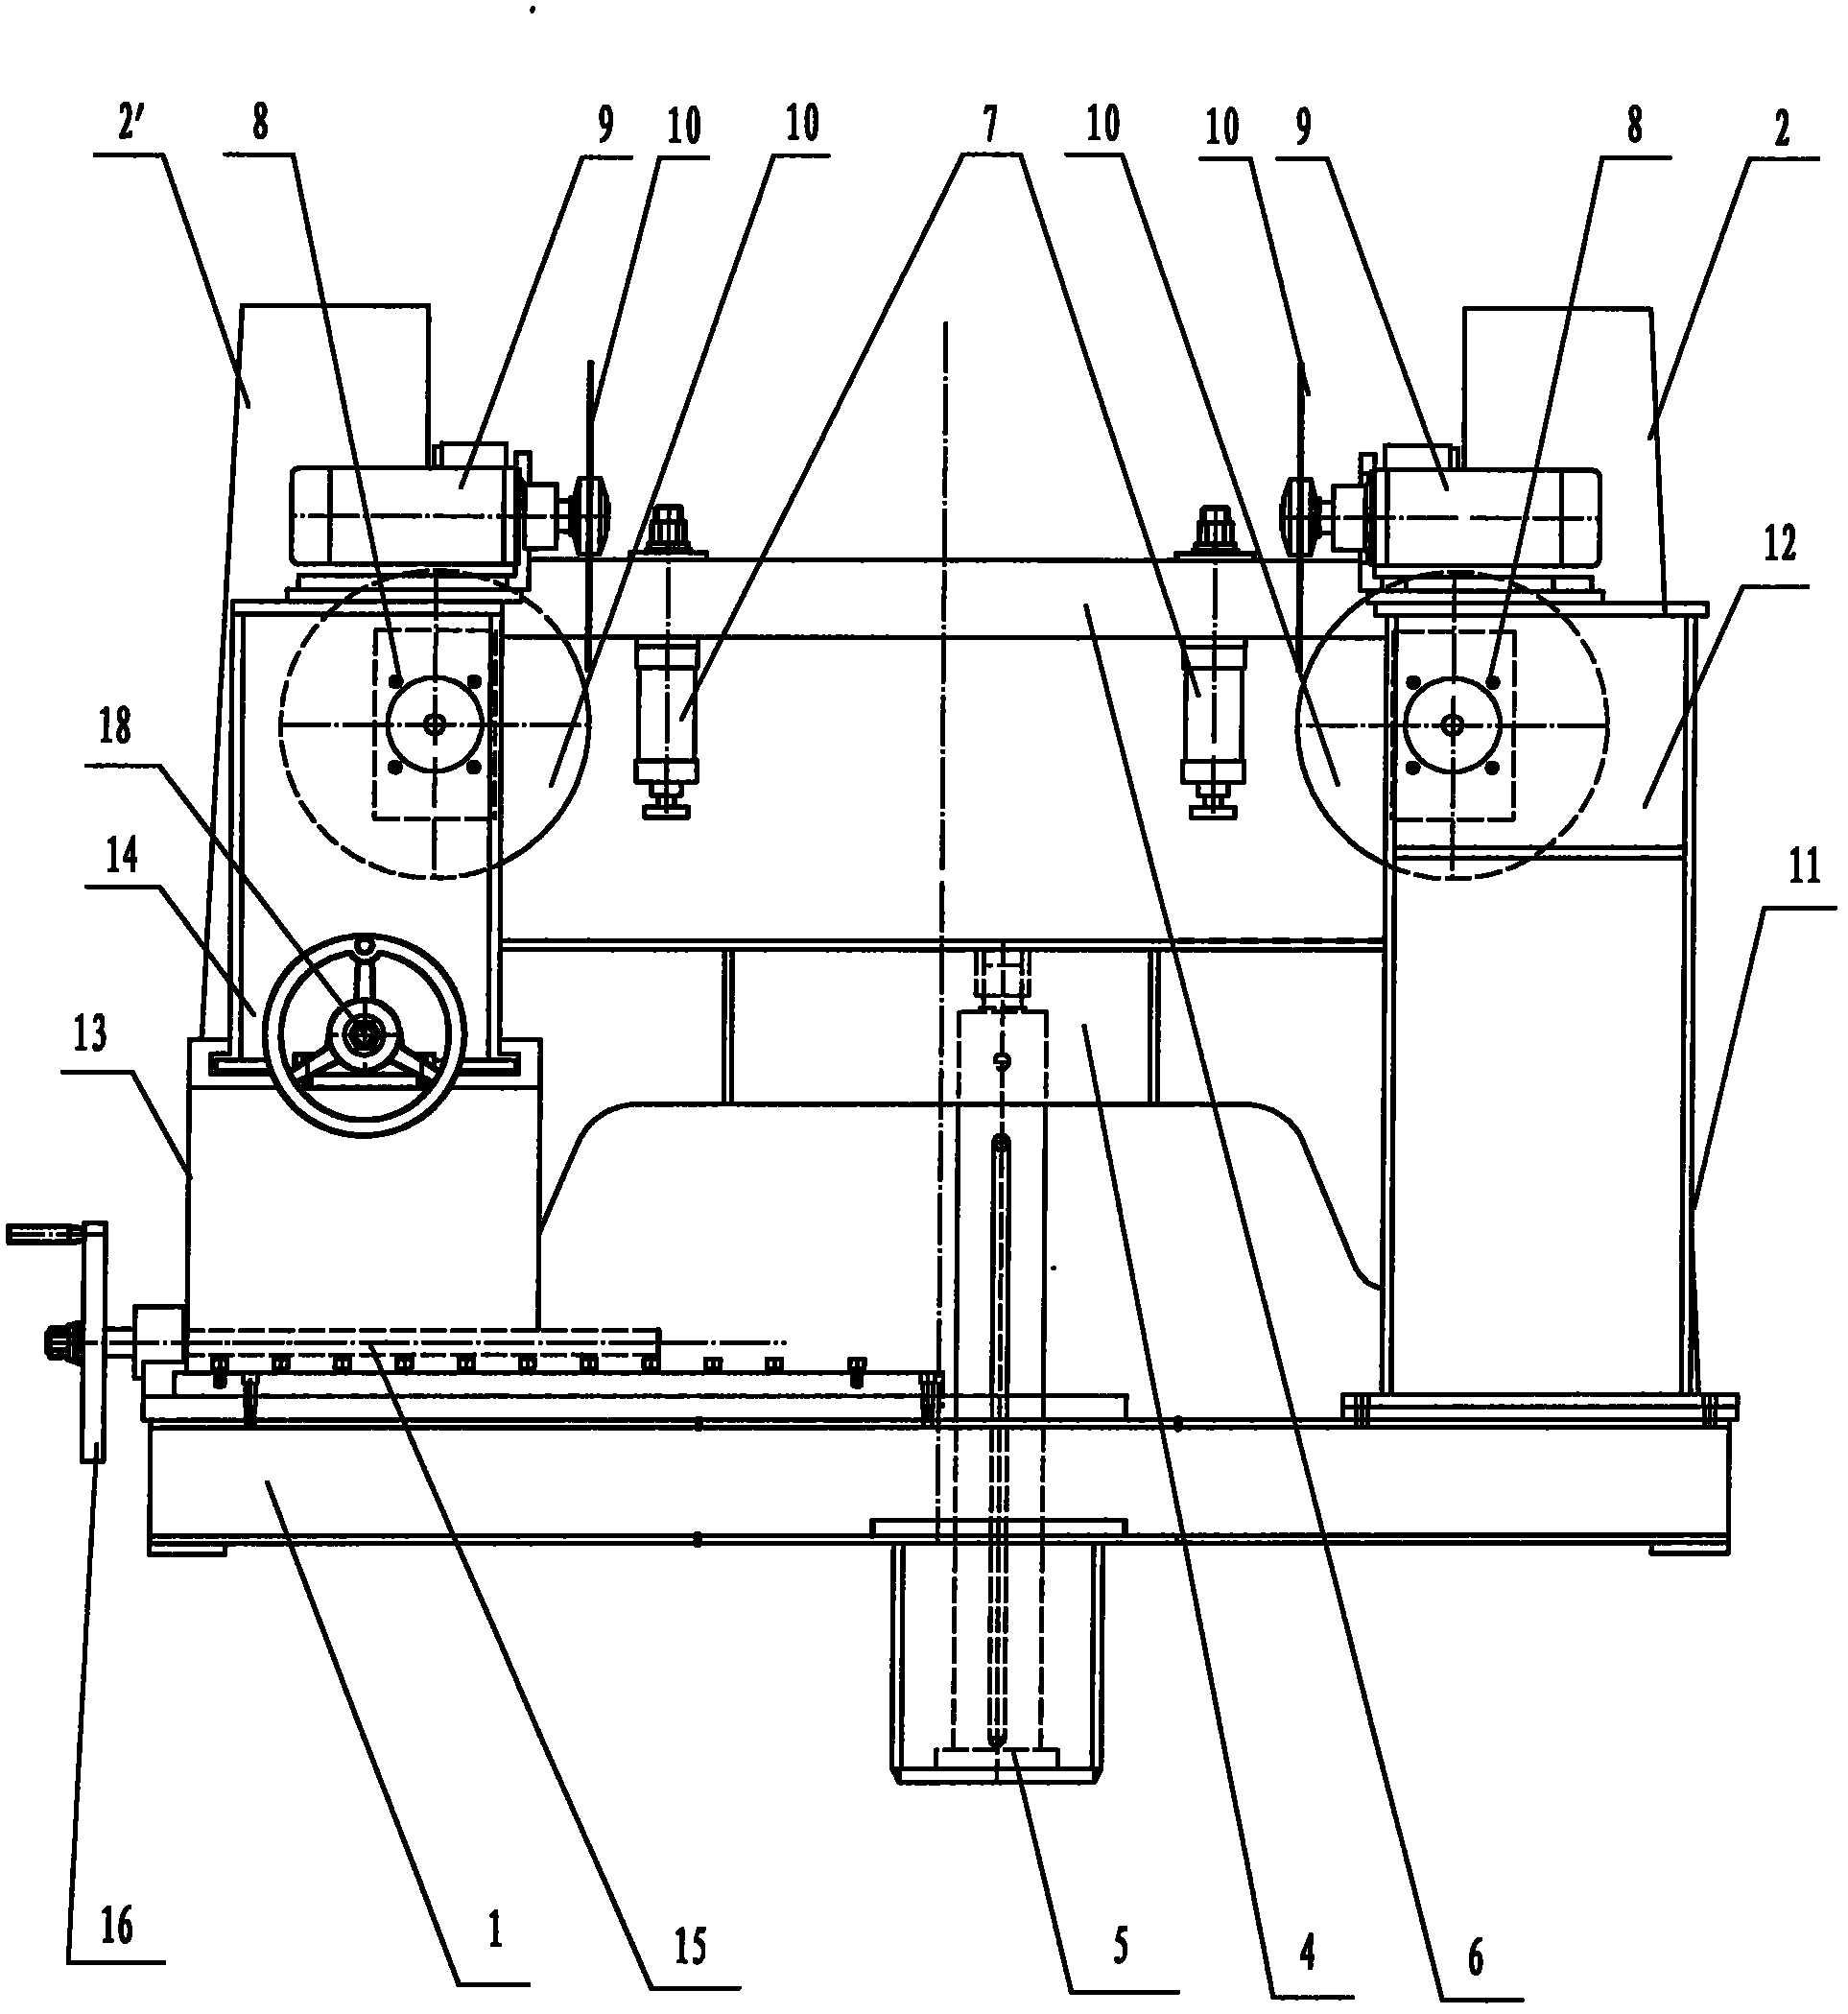 Board double-end corner sawing machine